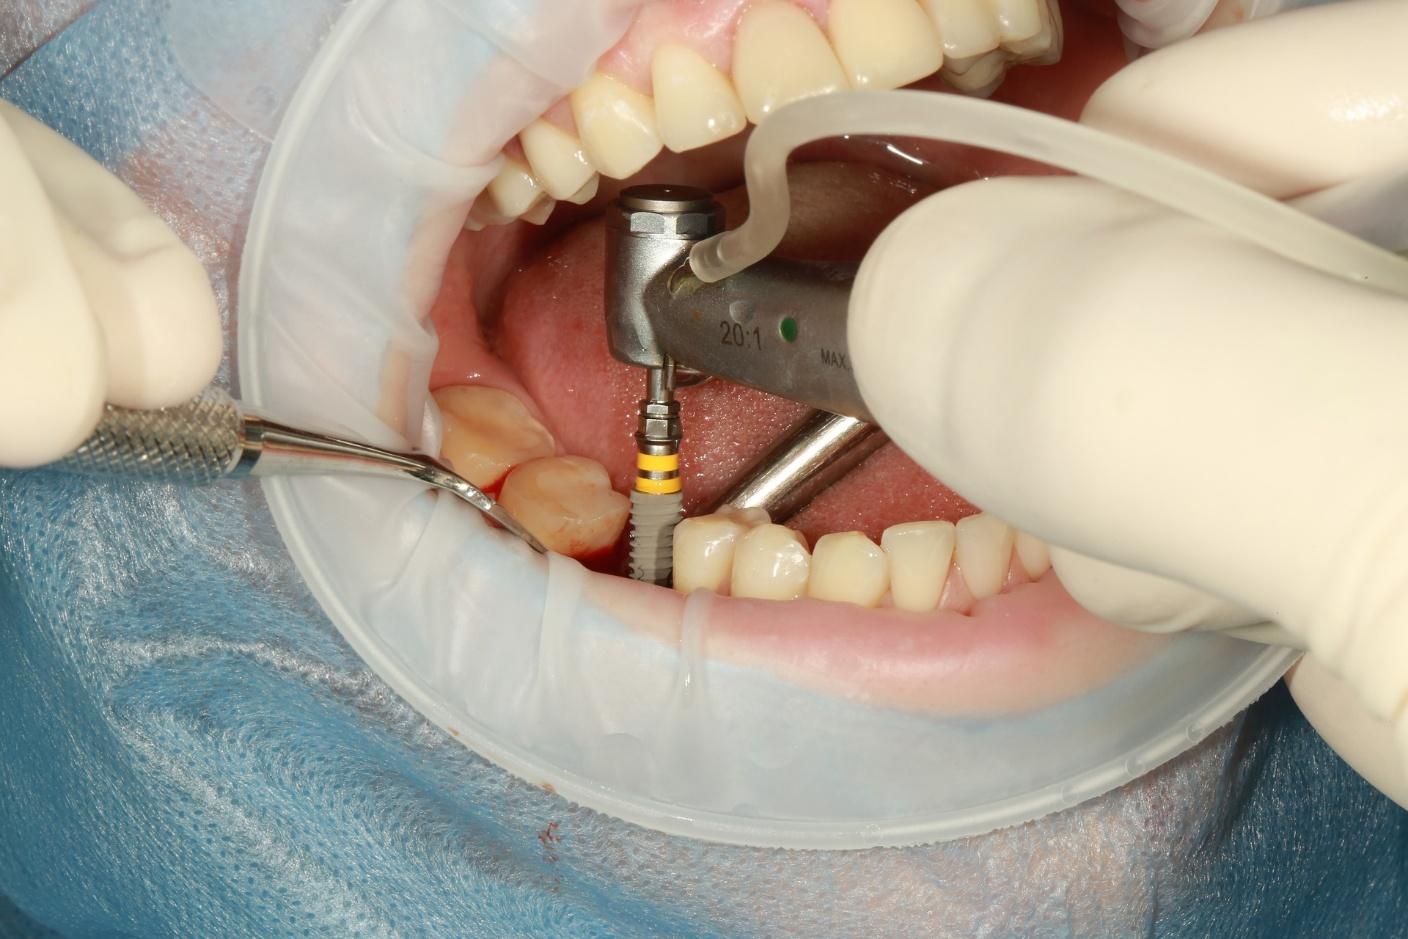 Types of Implants With Dental Care In Queens, New York